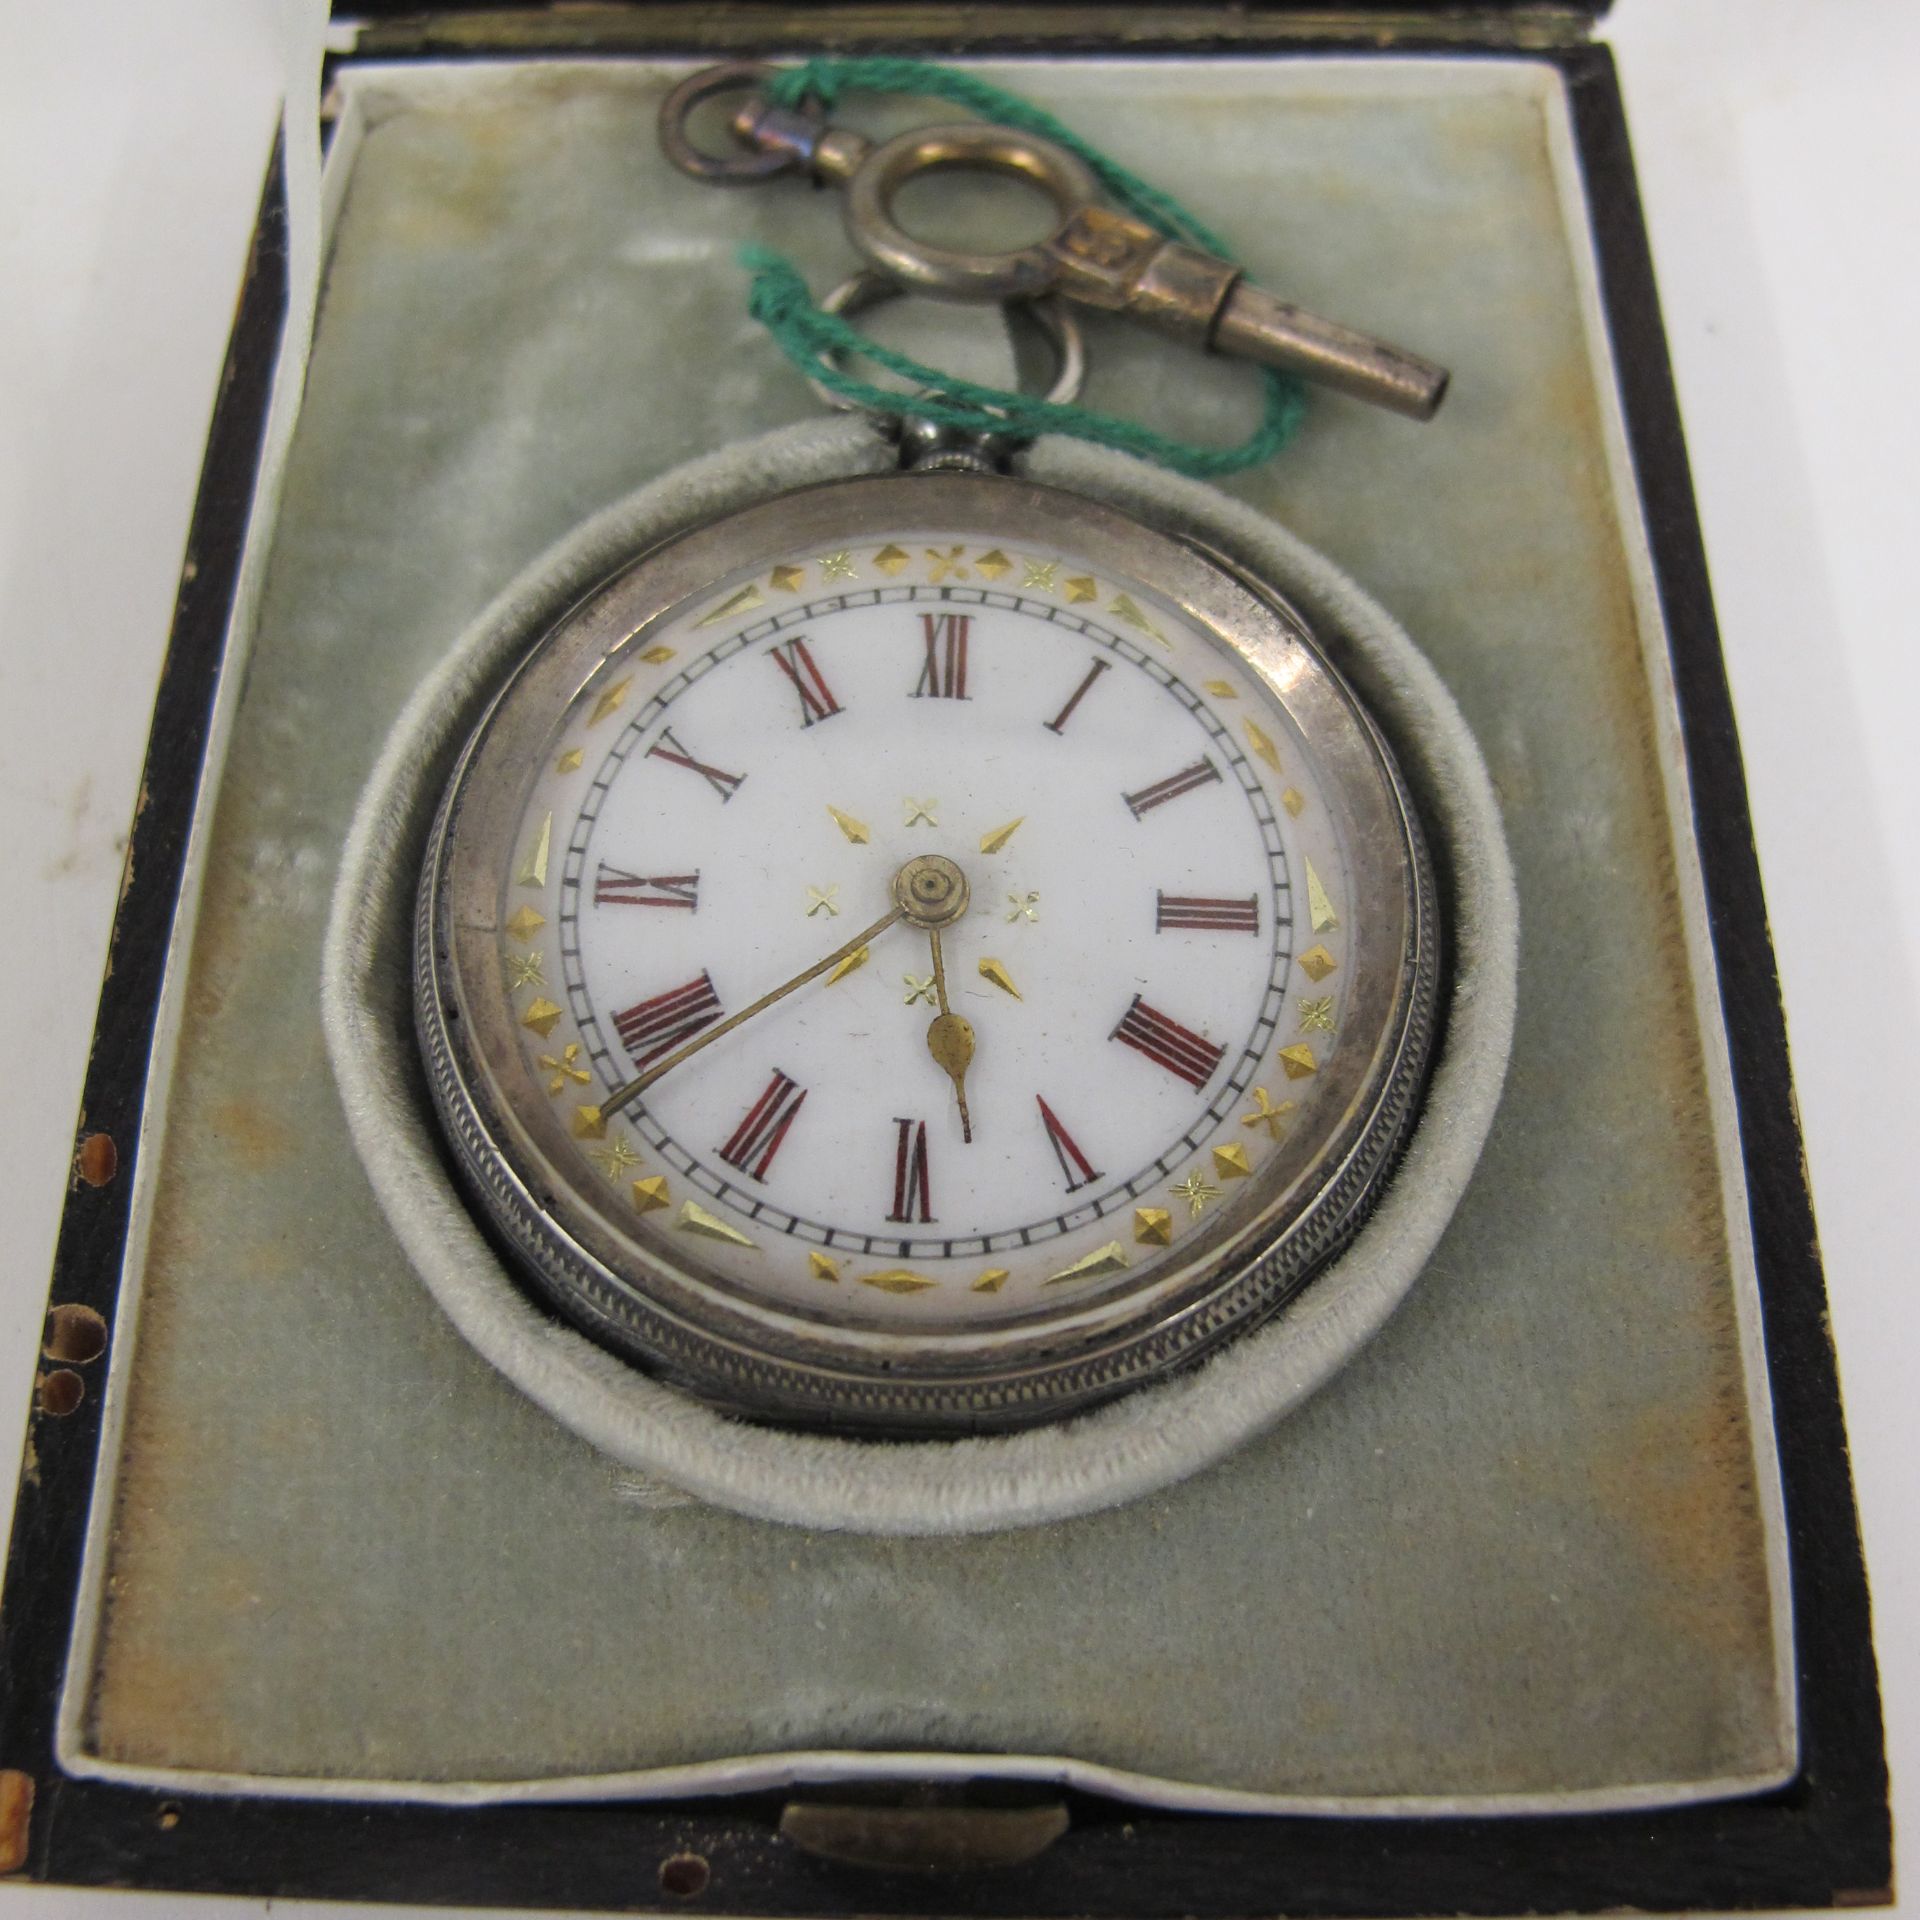 Antique Swiss Silver Fob Watch in a Tortoiseshell Antique Case (est £80-£120) - Image 2 of 7